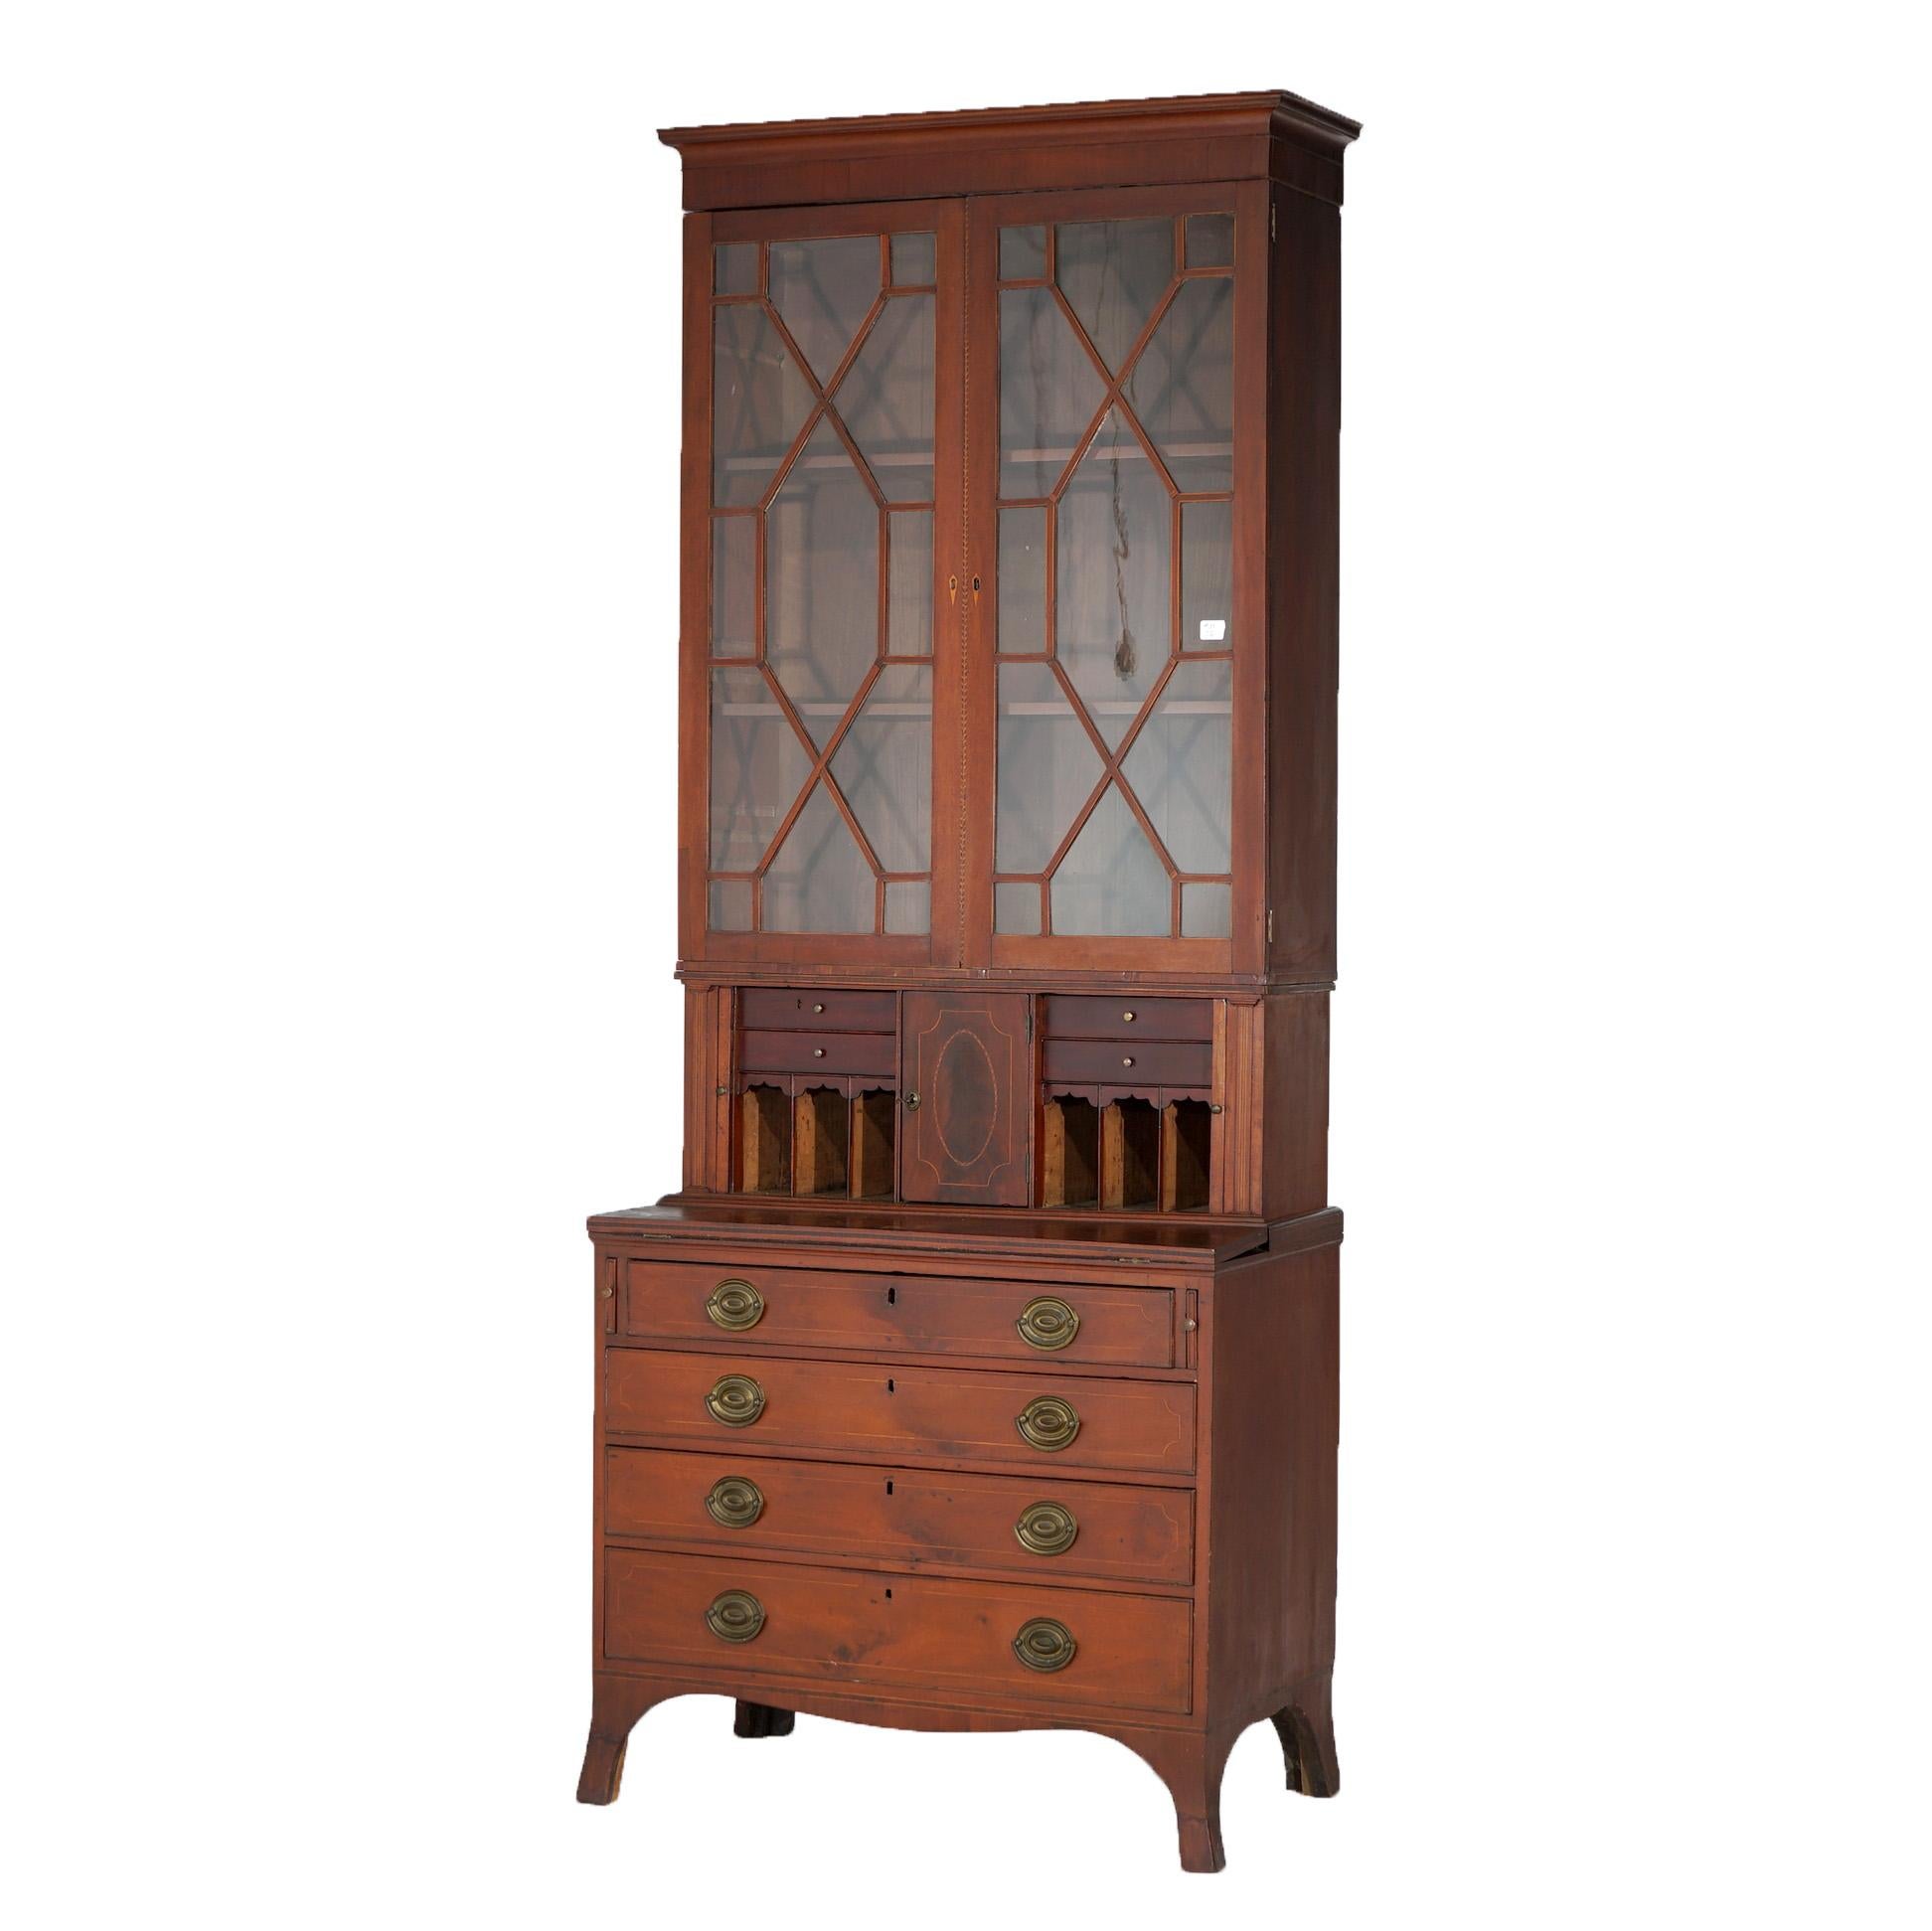 An antique secretary offers mahogany construction with upper bookcase having double mullioned glass doors surmounting desk with tambour doors opening to storage compartments and drop-down writing surface over lower case having graduated long drawers